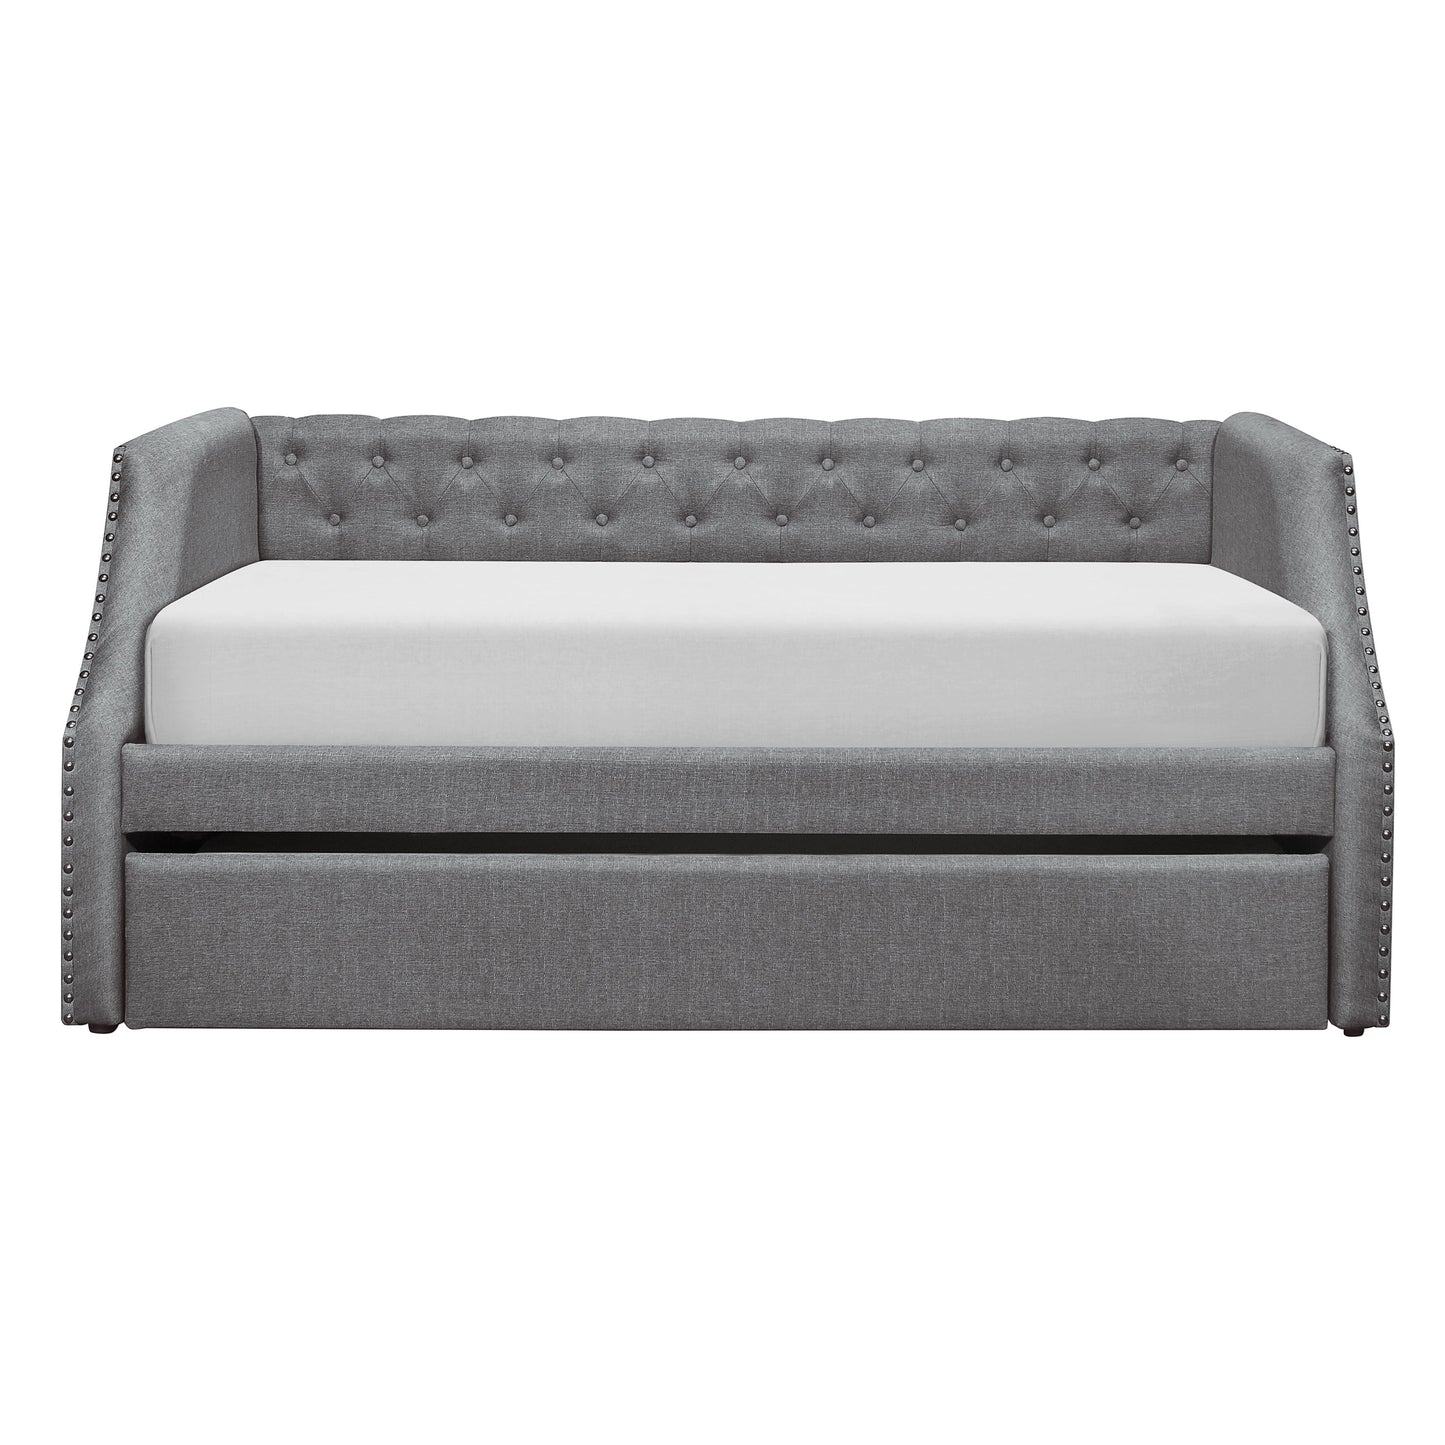 Corrina Gray Daybed with Trundle